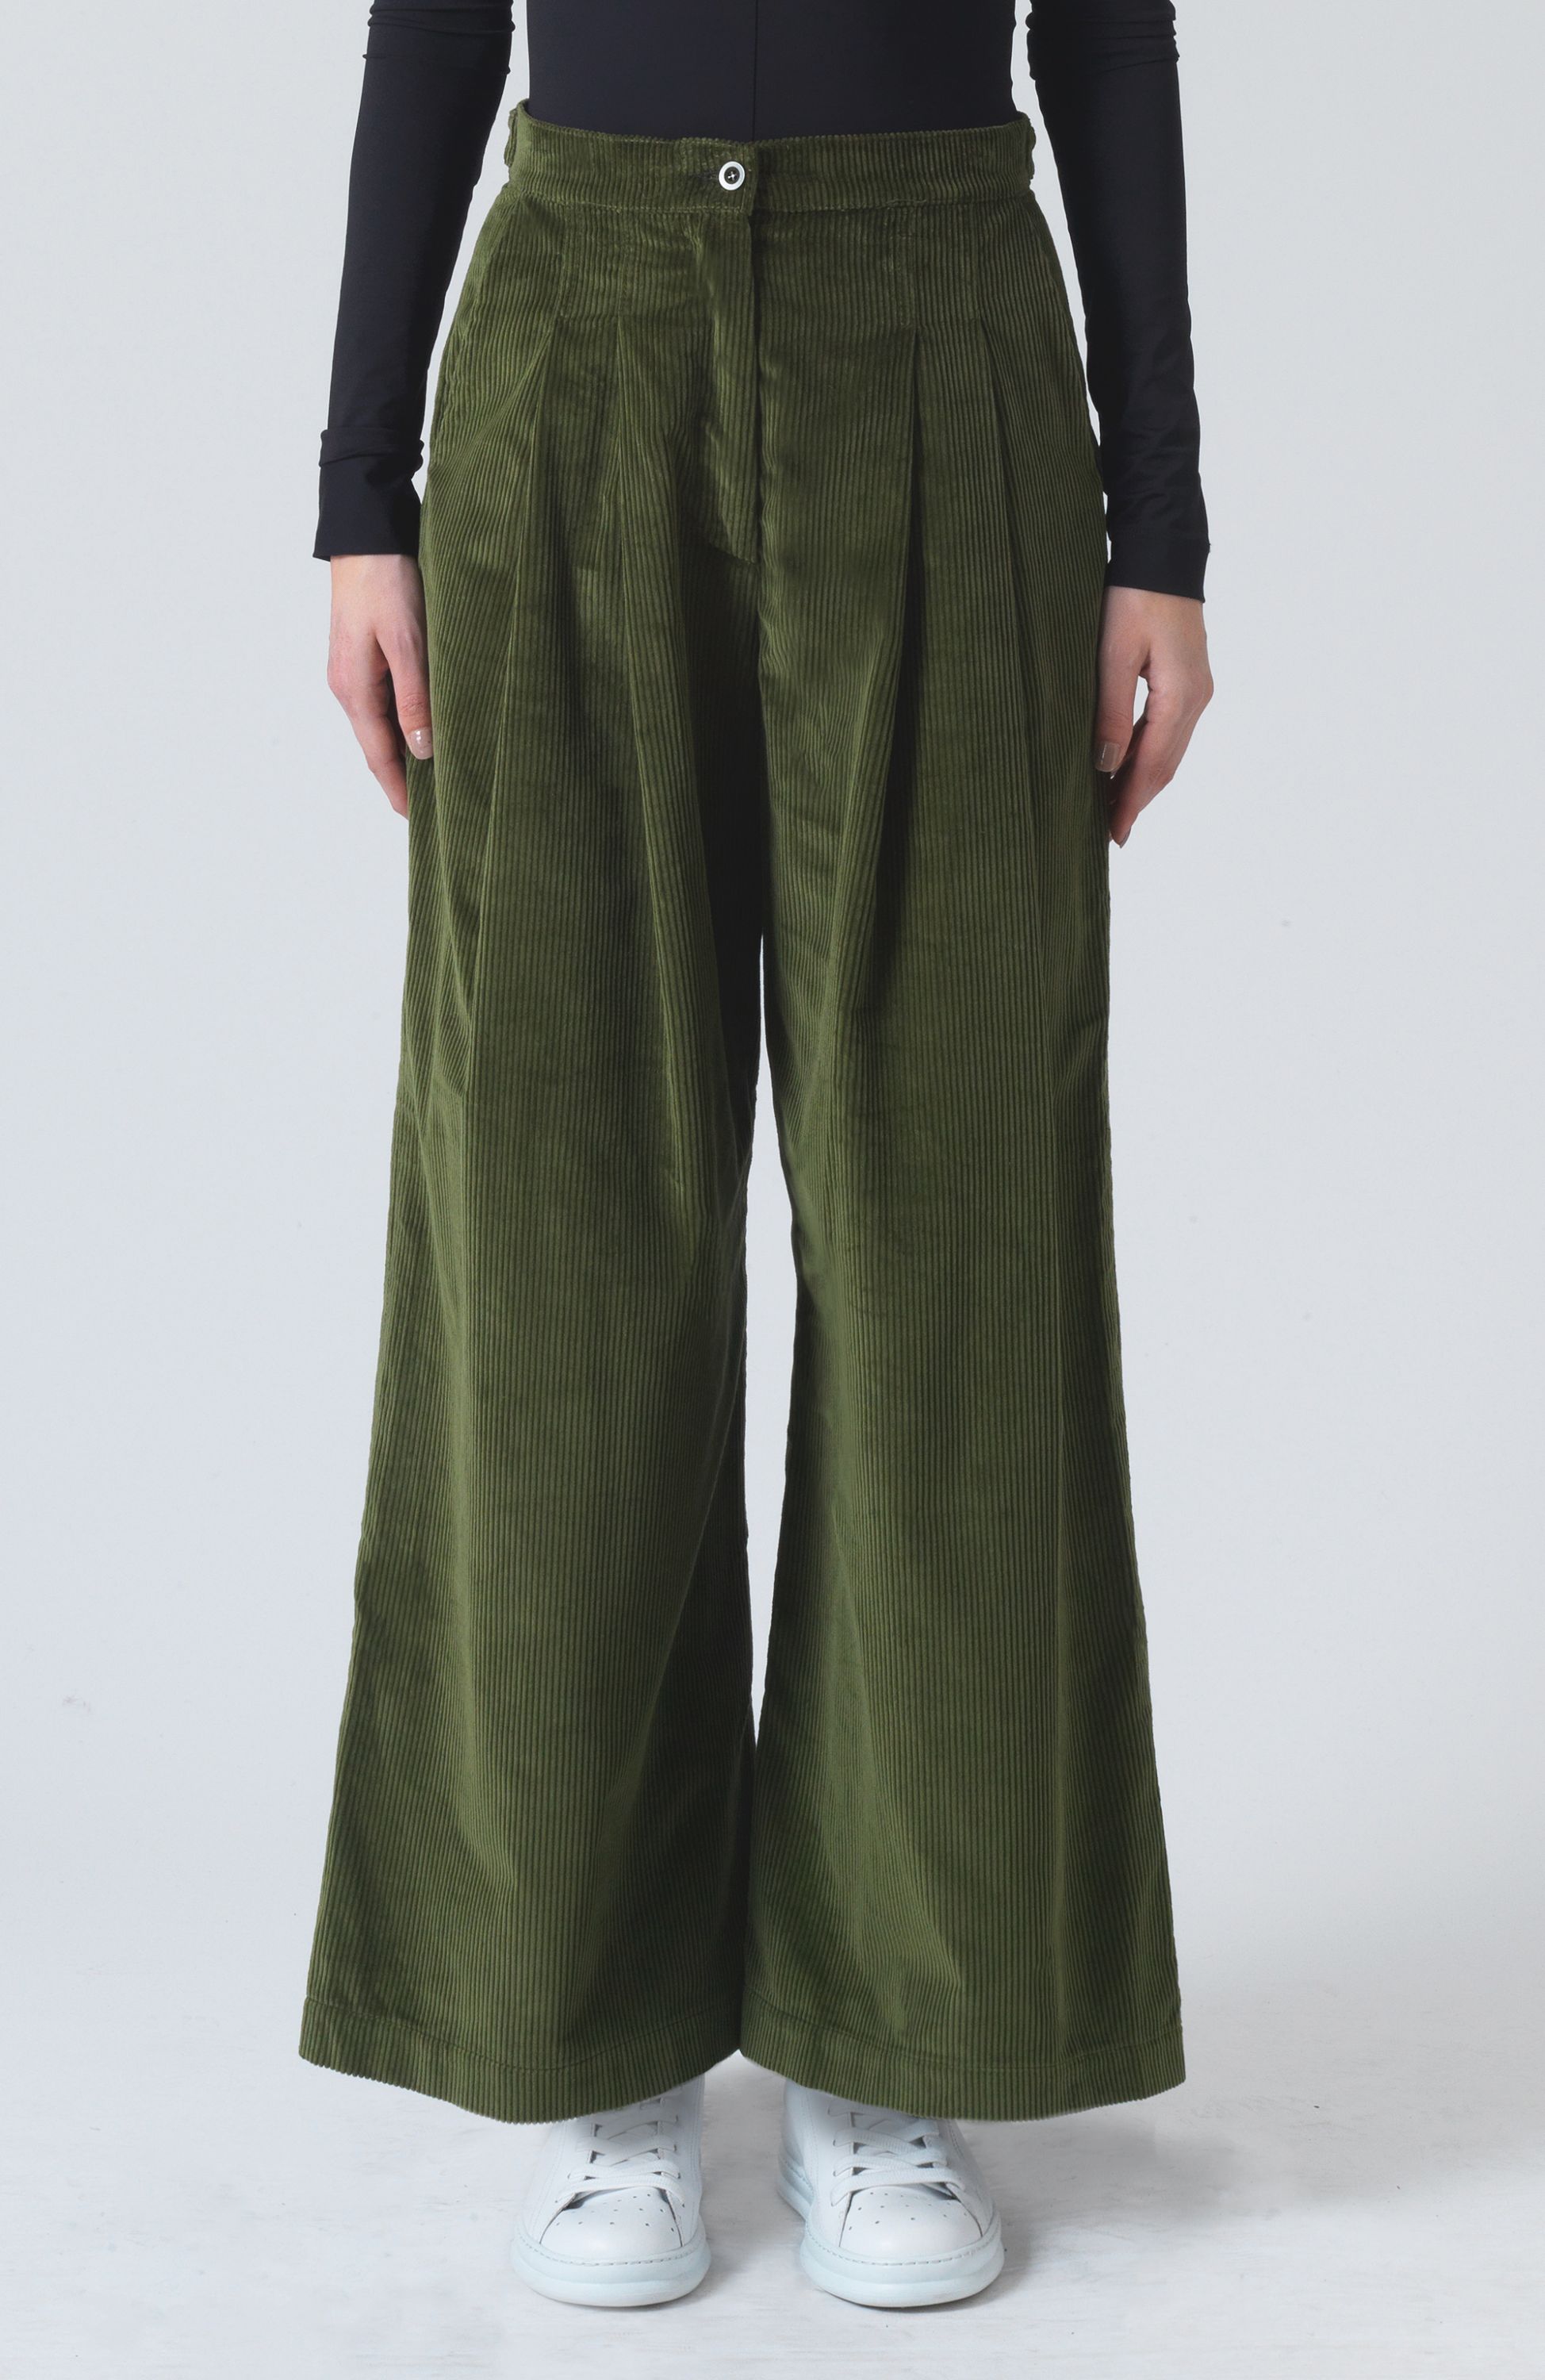 Wide Corduroy Trousers  Dark Blue  ARKET  Wide leg pants outfit Corduroy  pants outfit Blue trousers outfit